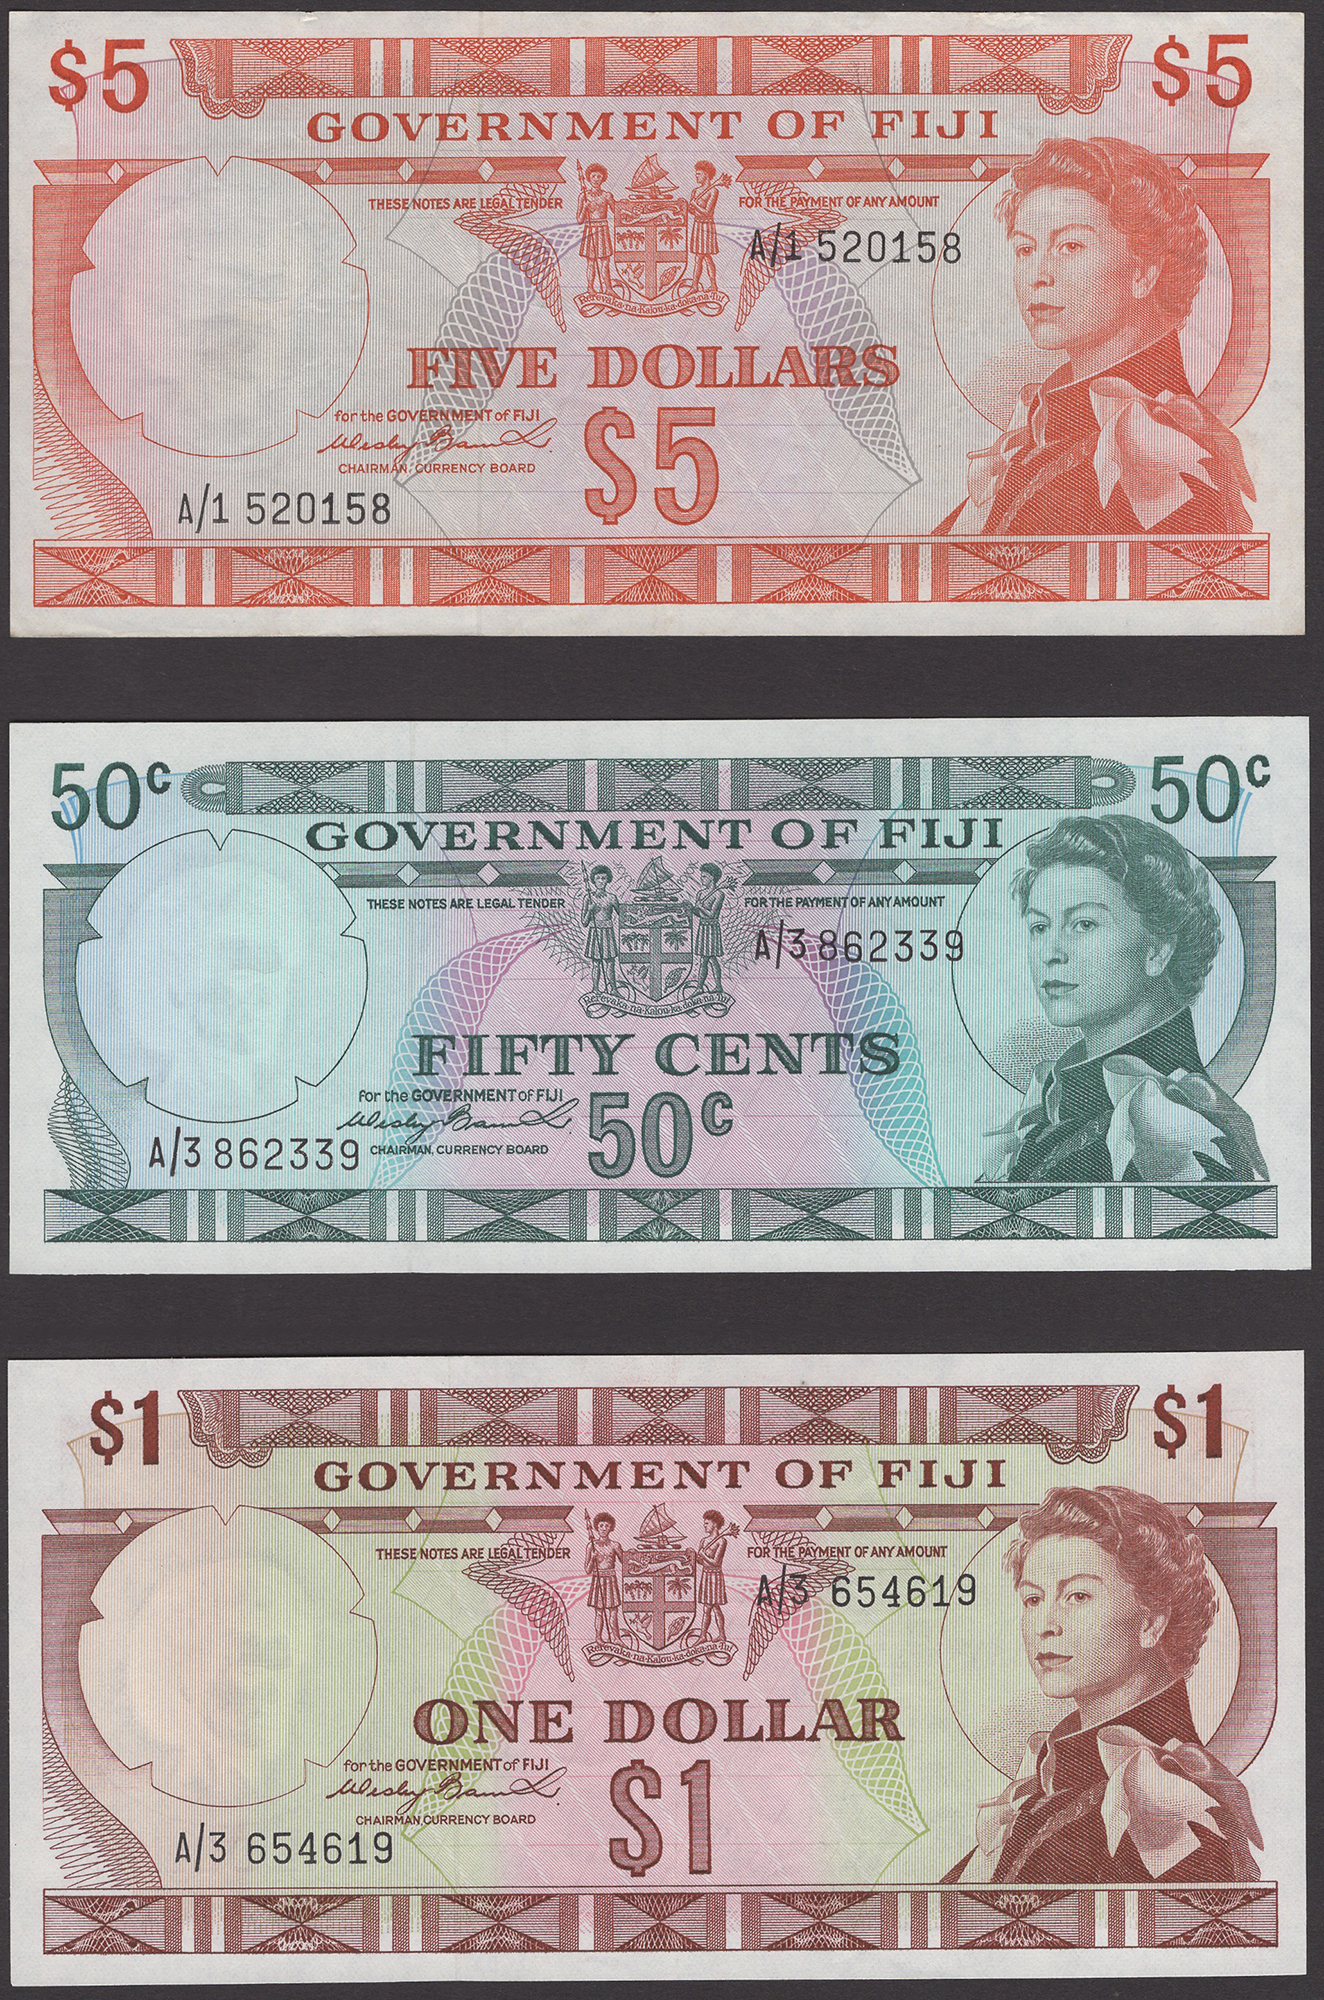 Government of Fiji, 50 Cents, $1, $2 and $5, ND (1971), prefixes A/3, A/3, A/4 and A/1,...